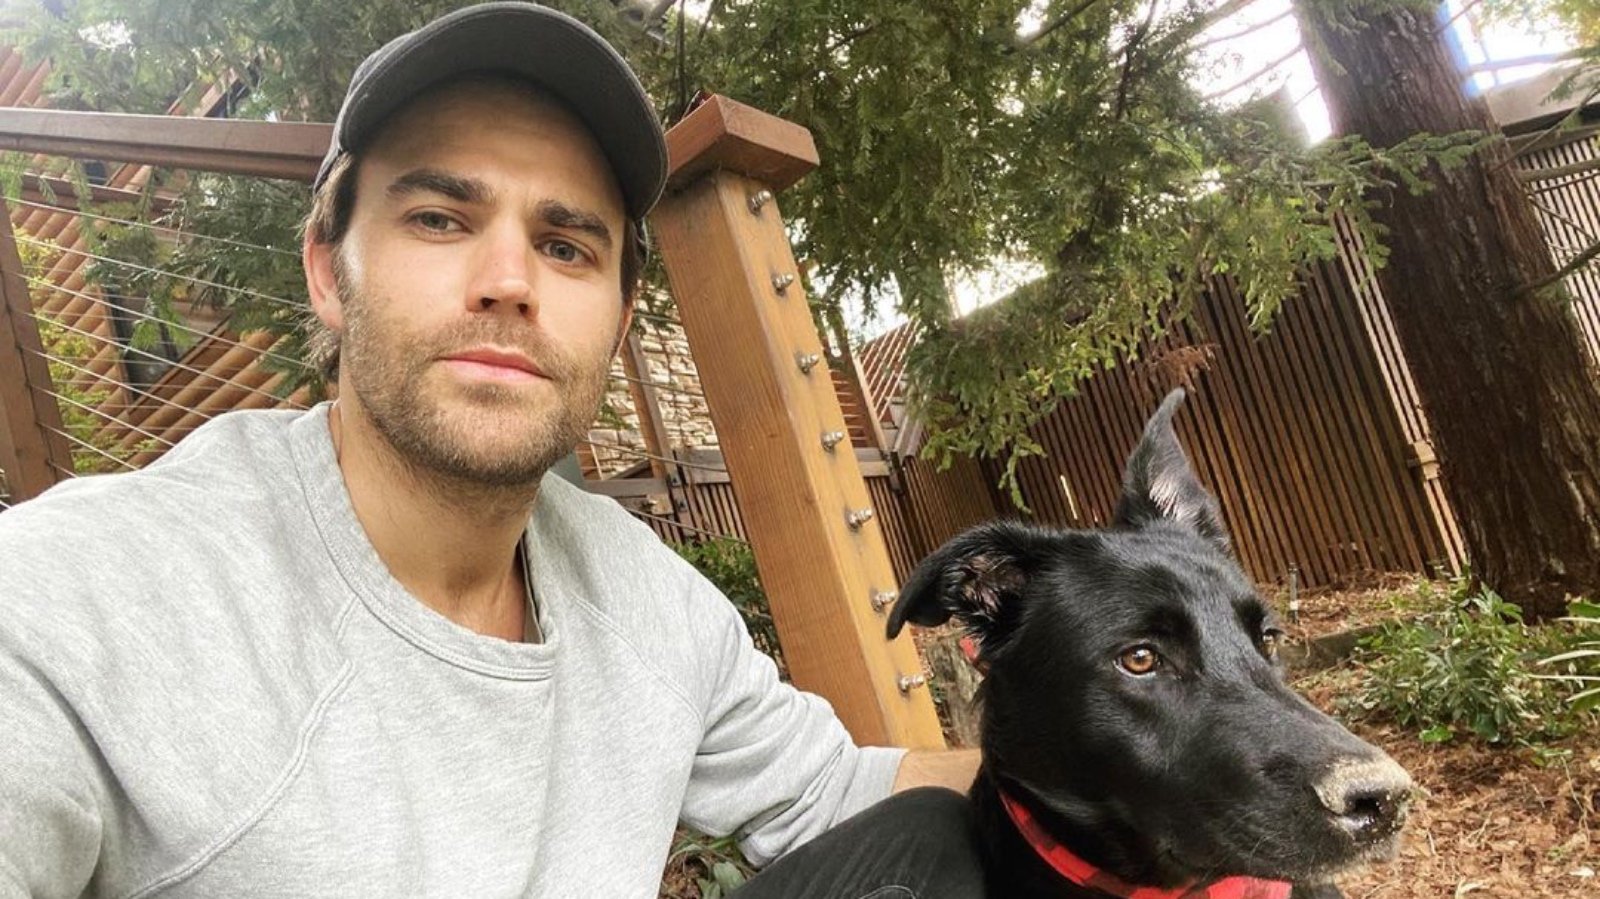 Paul Wesley Urges 10.9 Million Fans To Cut Down On Animal Products